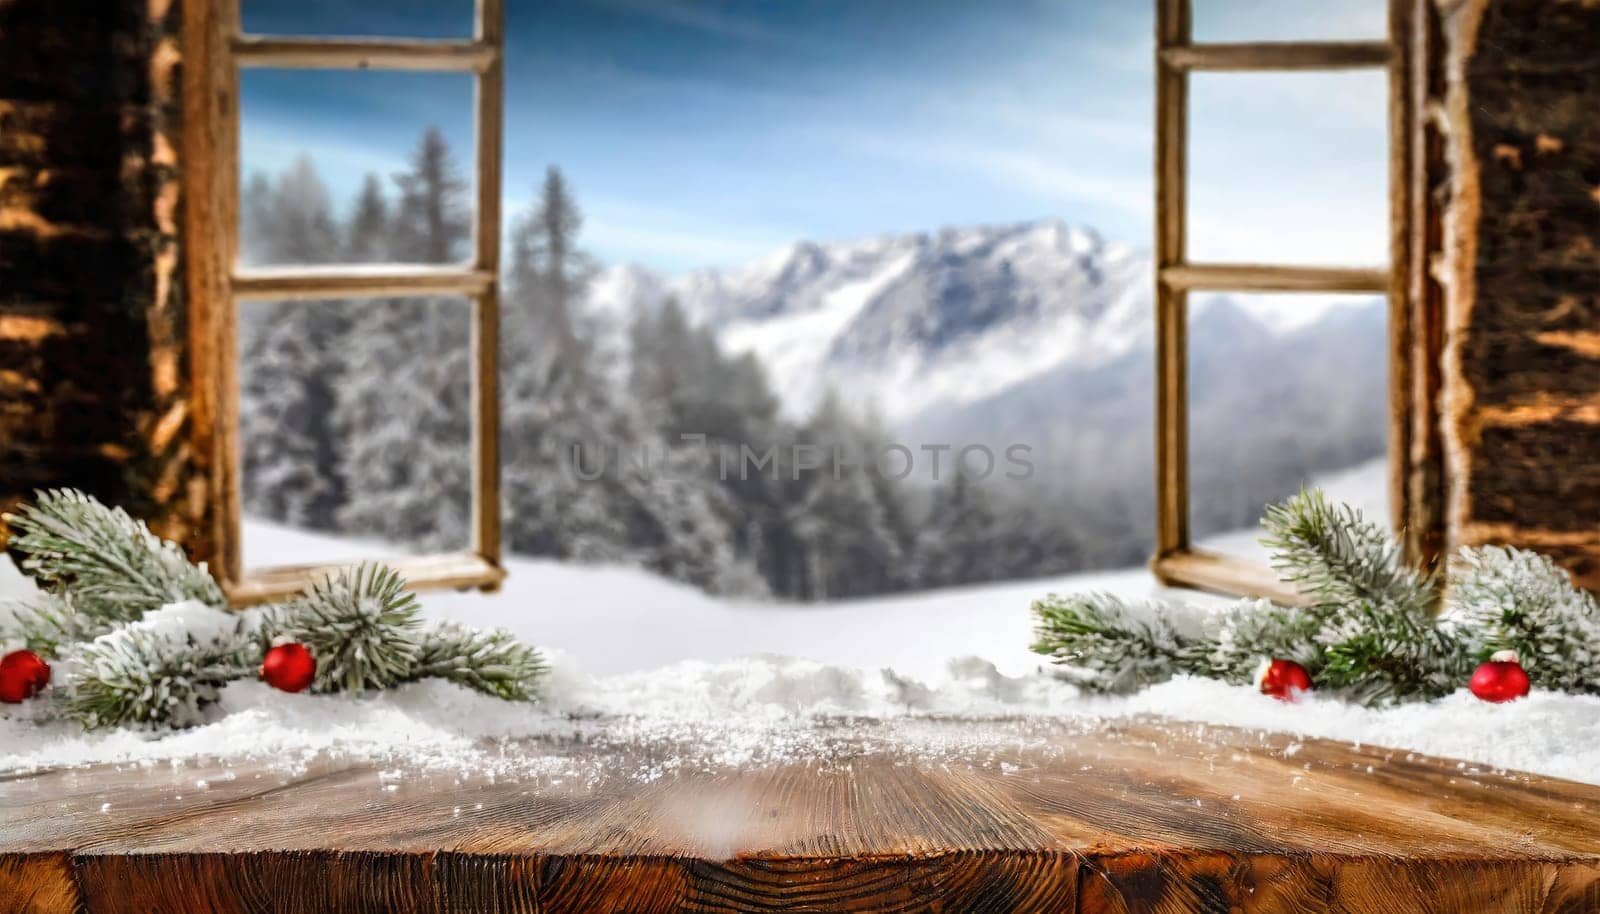 Wooden desk cover of snow and frost with christmas tree branch decoration photo. by PeaceYAY